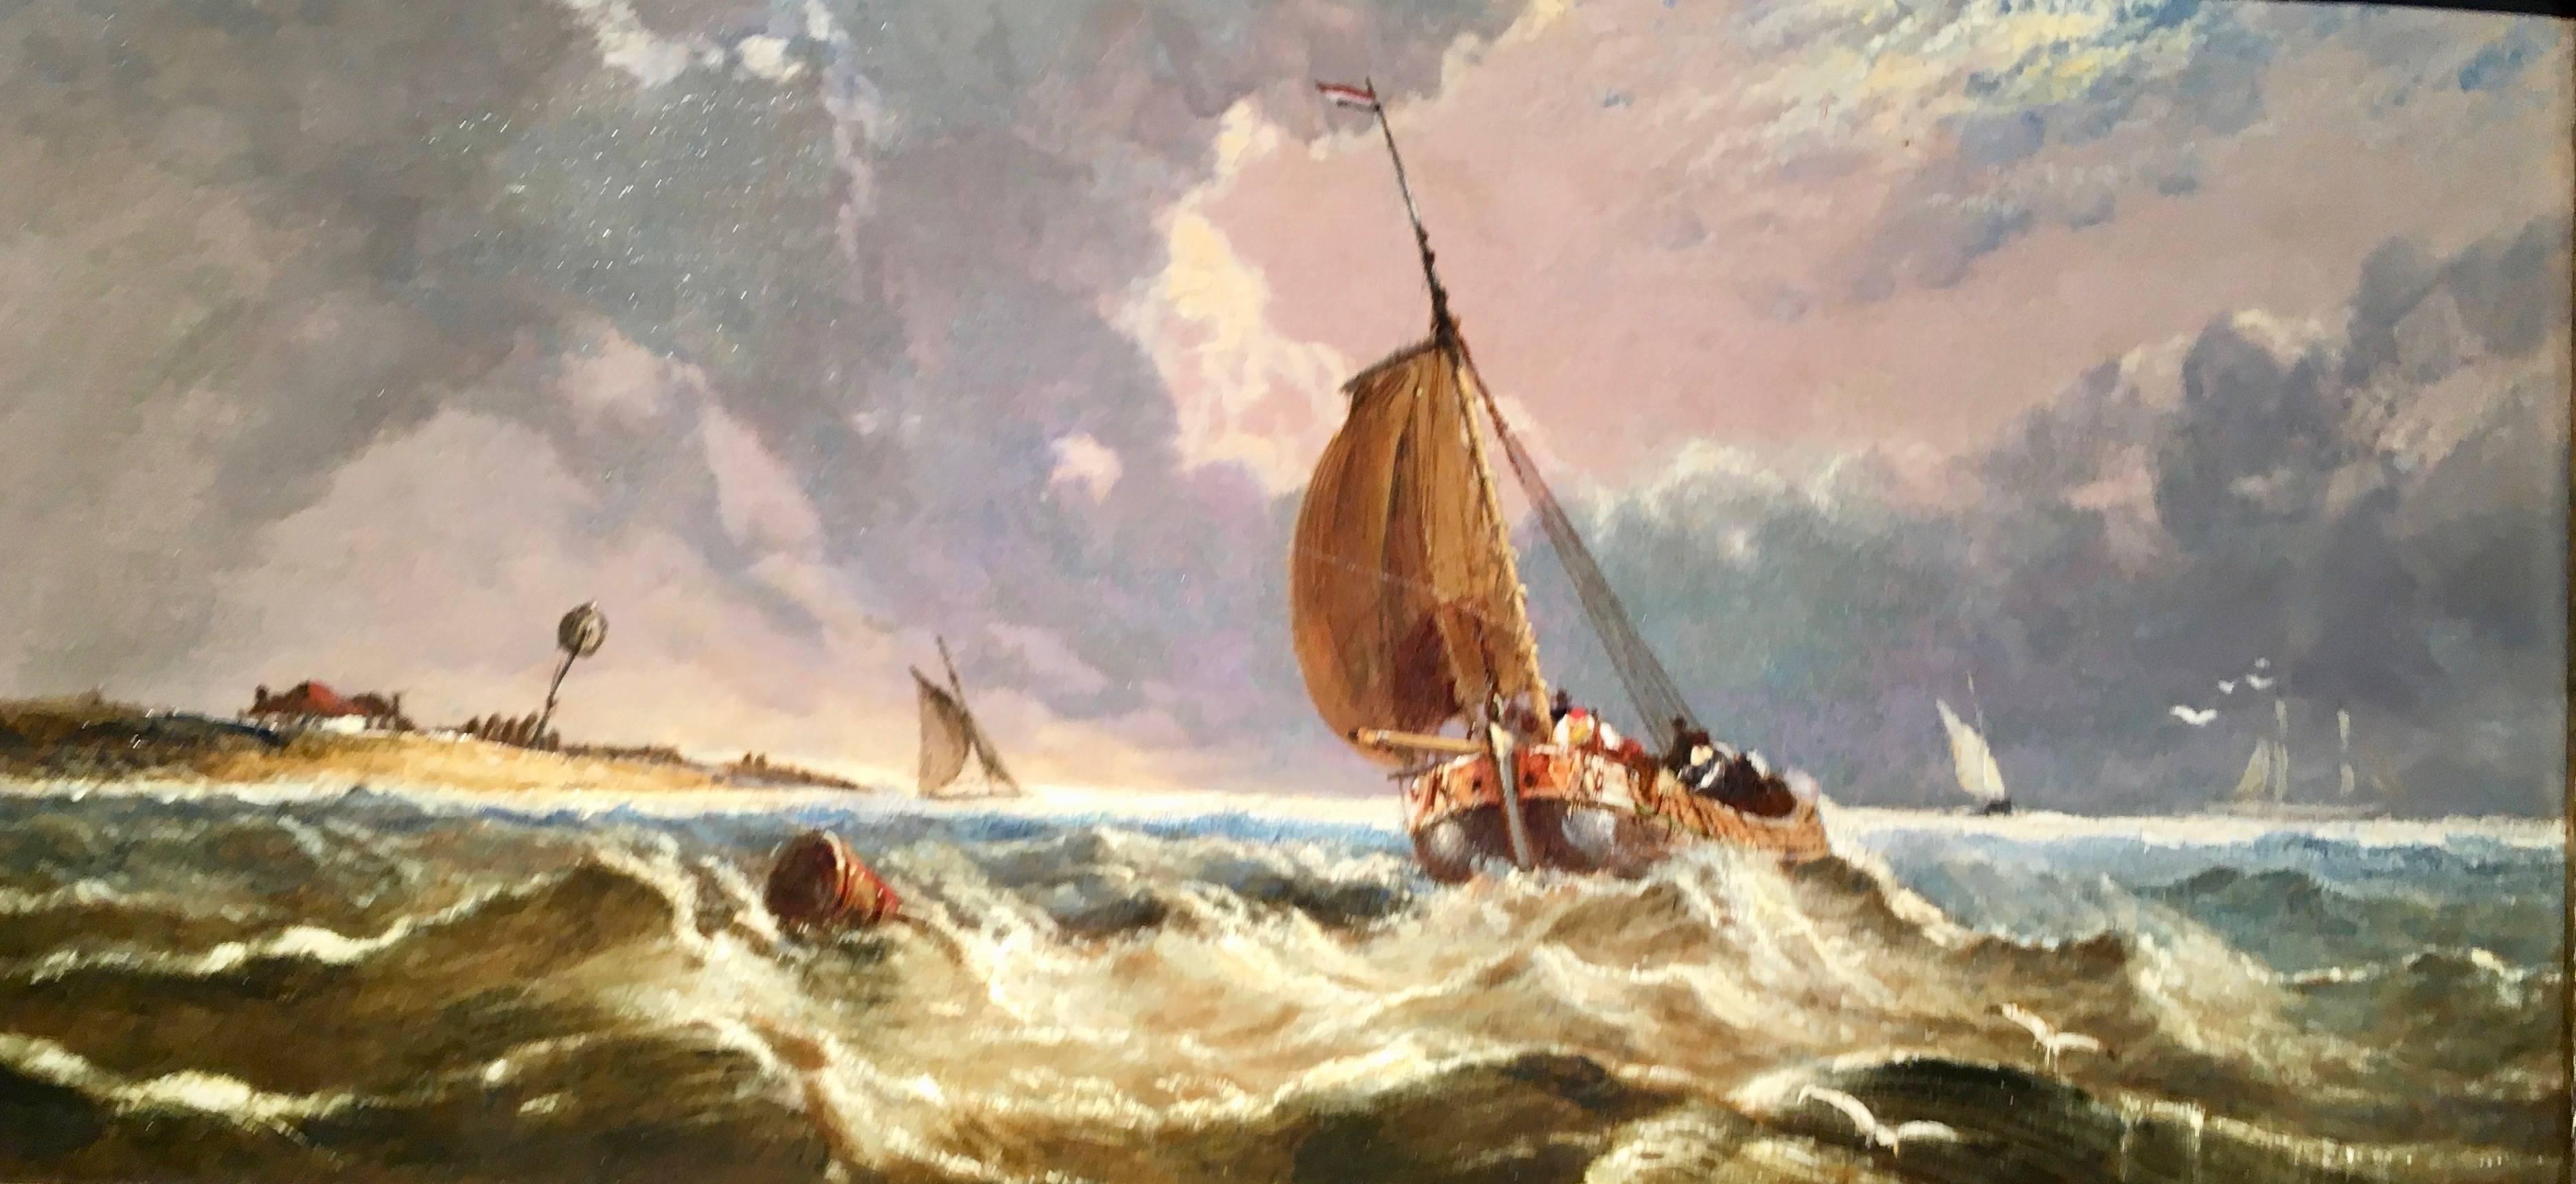 English fishing boats in rough seas off the coast of England  - Painting by Arthur Joseph Meadows